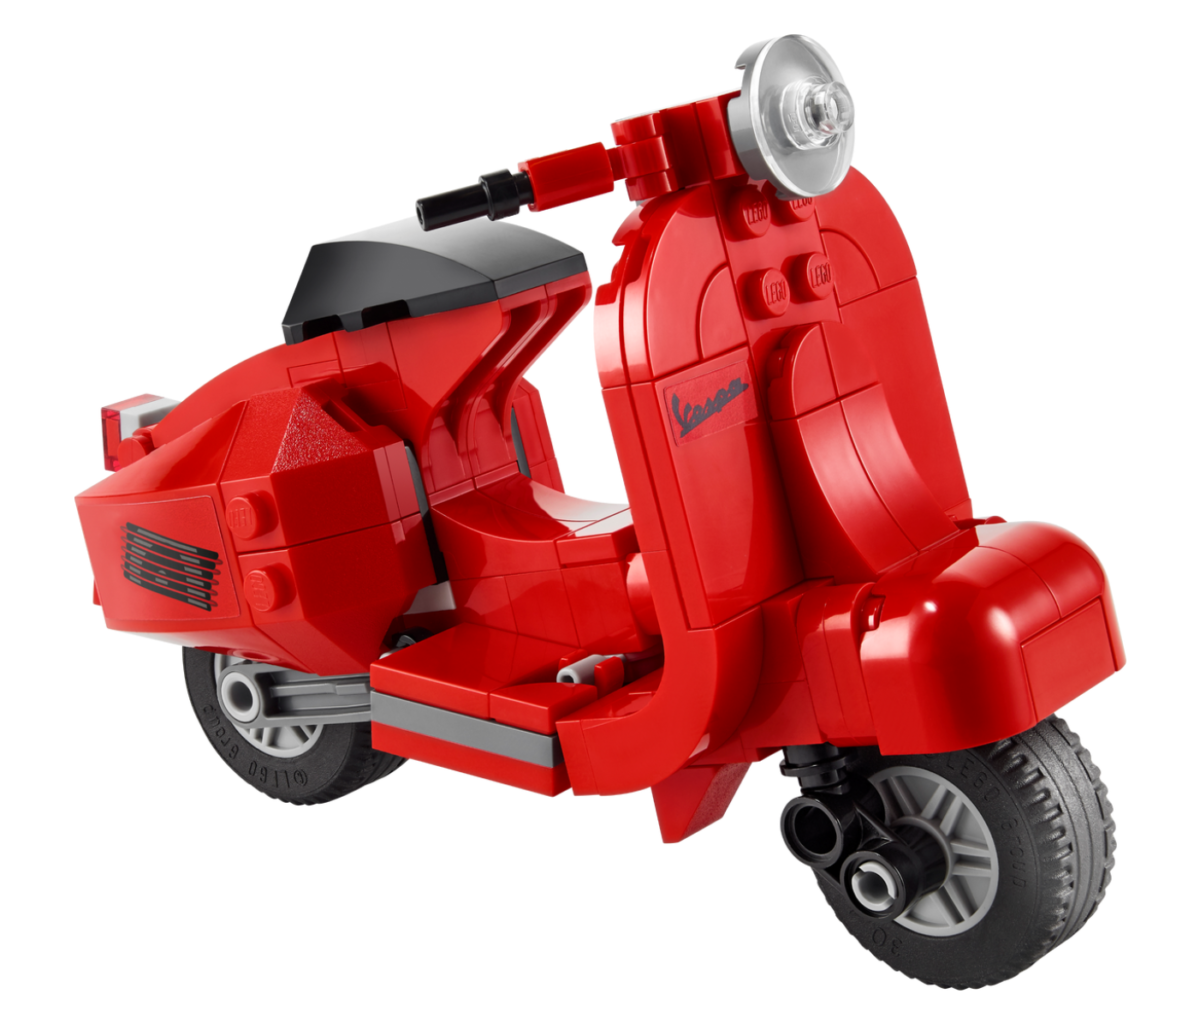 Every licensed motorcycle set from LEGO Technic and beyond